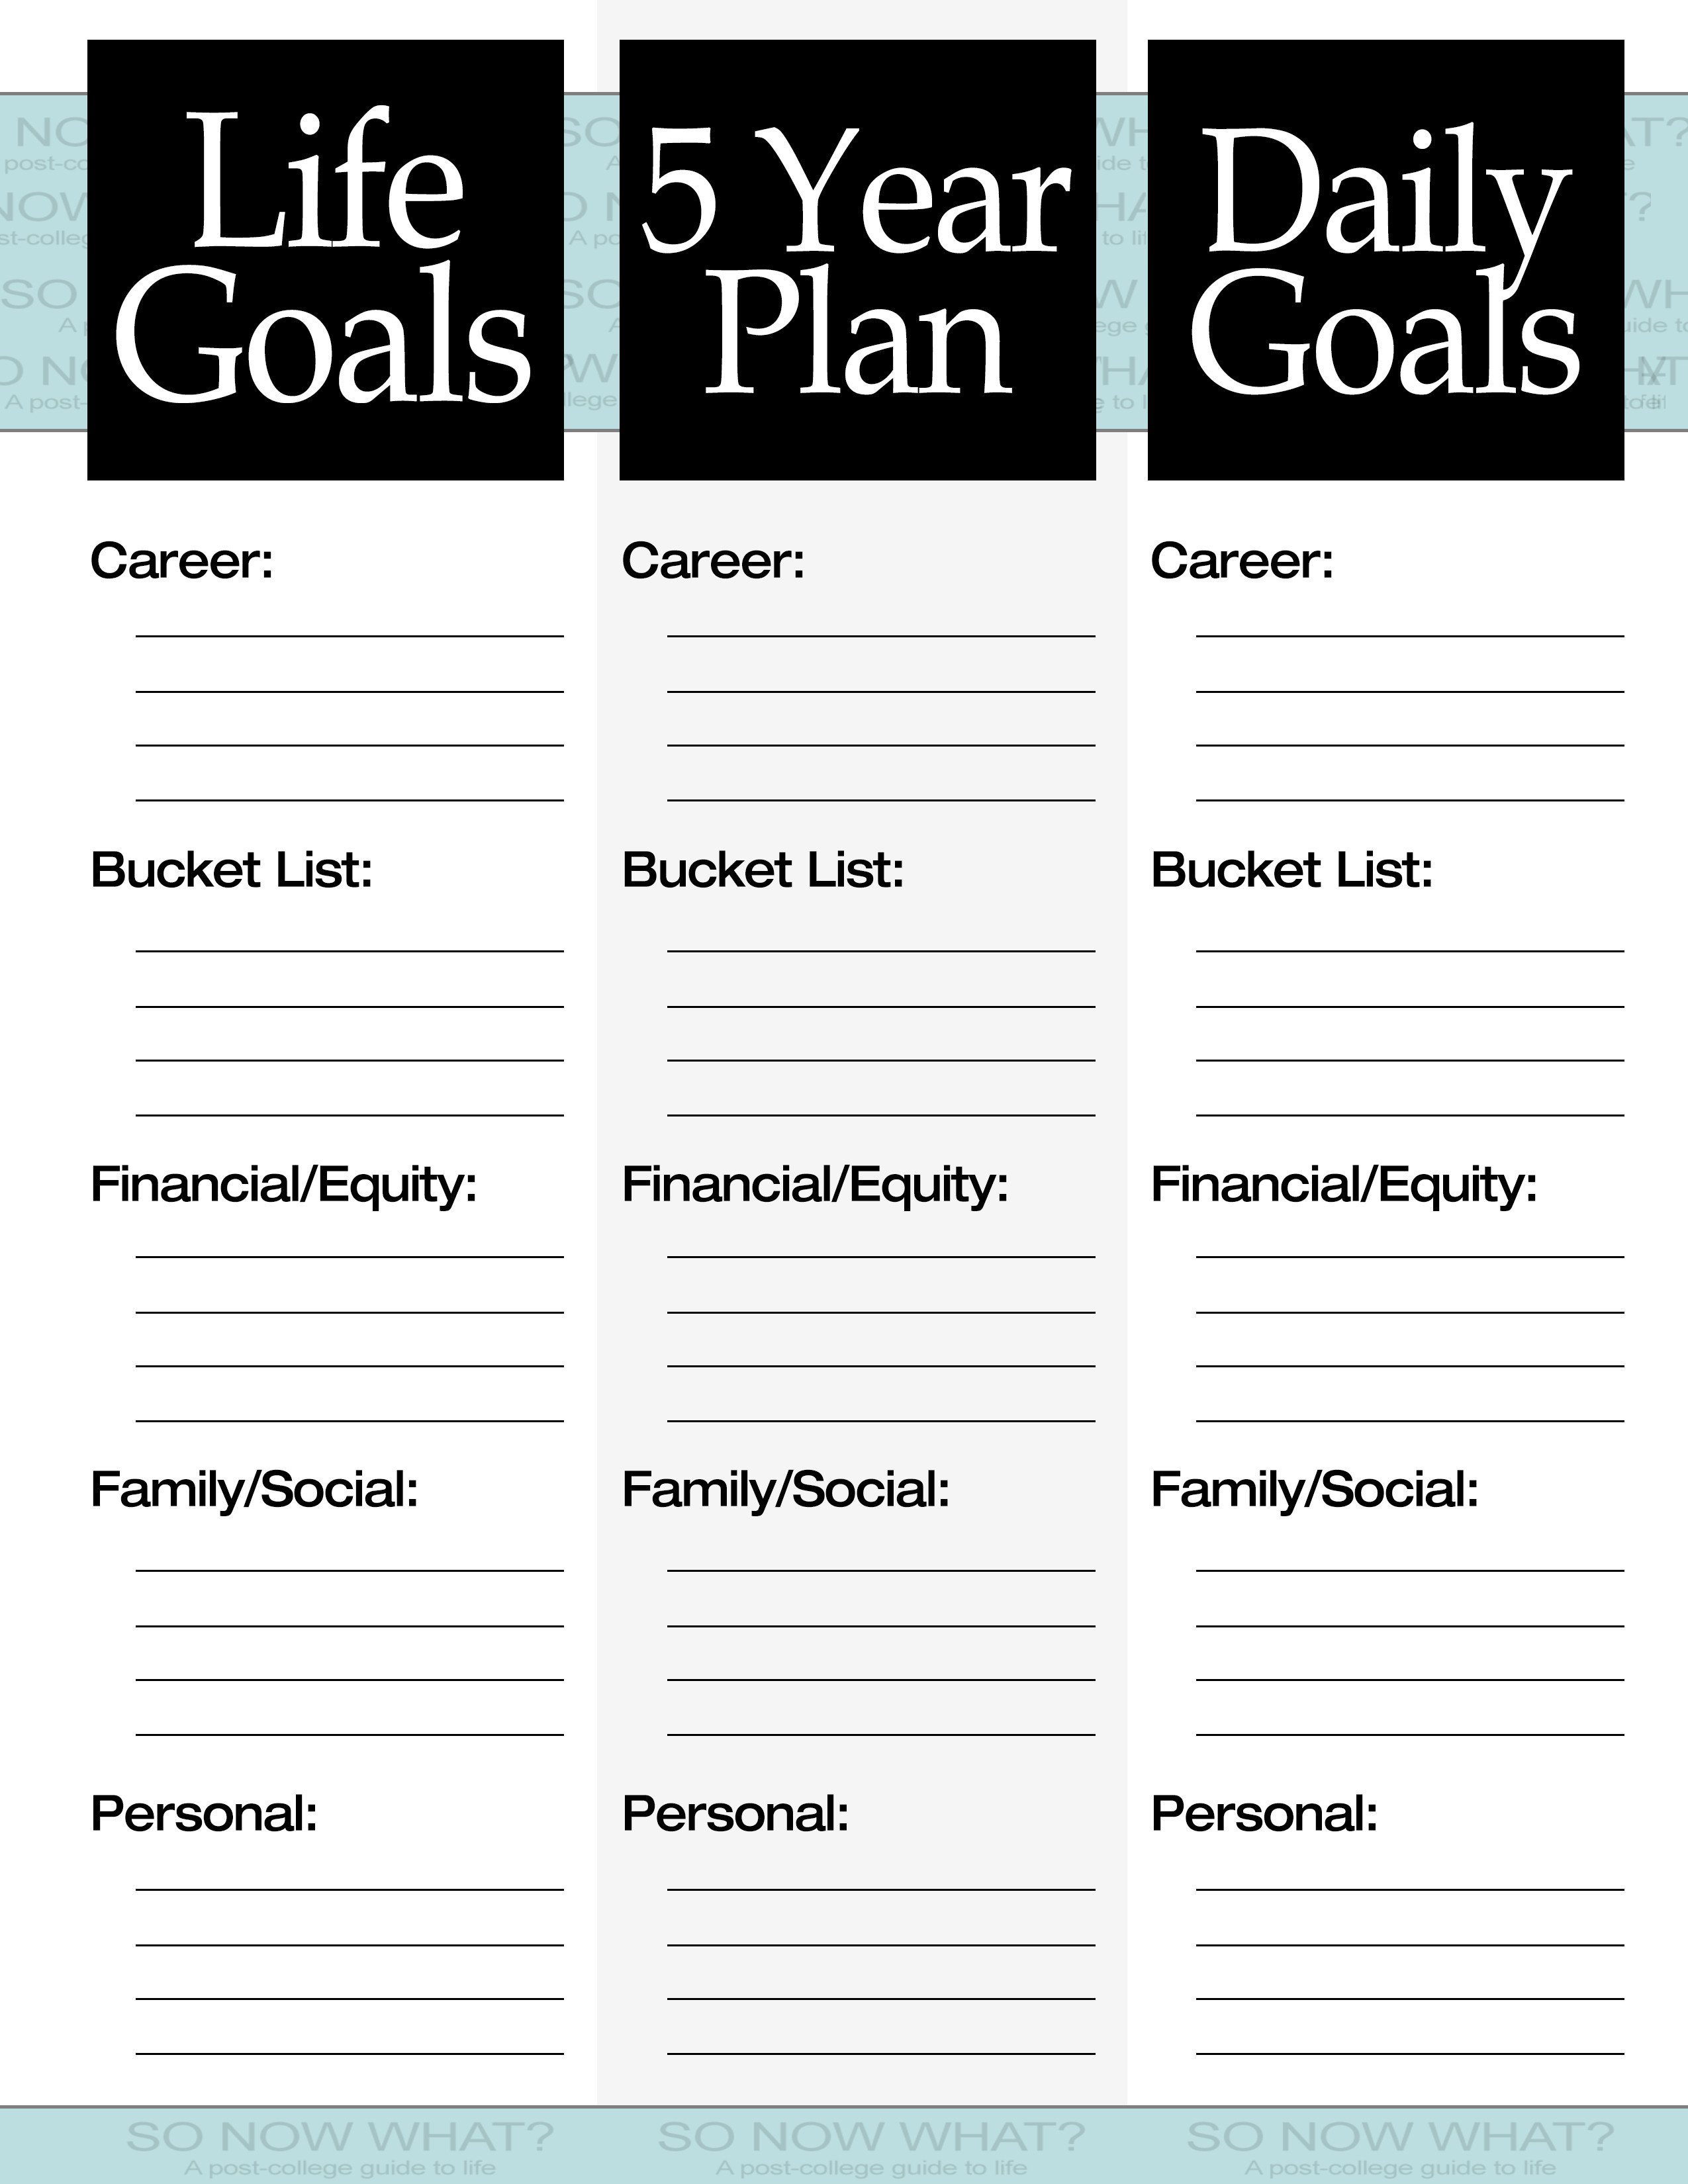 The 3 Steps to a 5 Year Plan